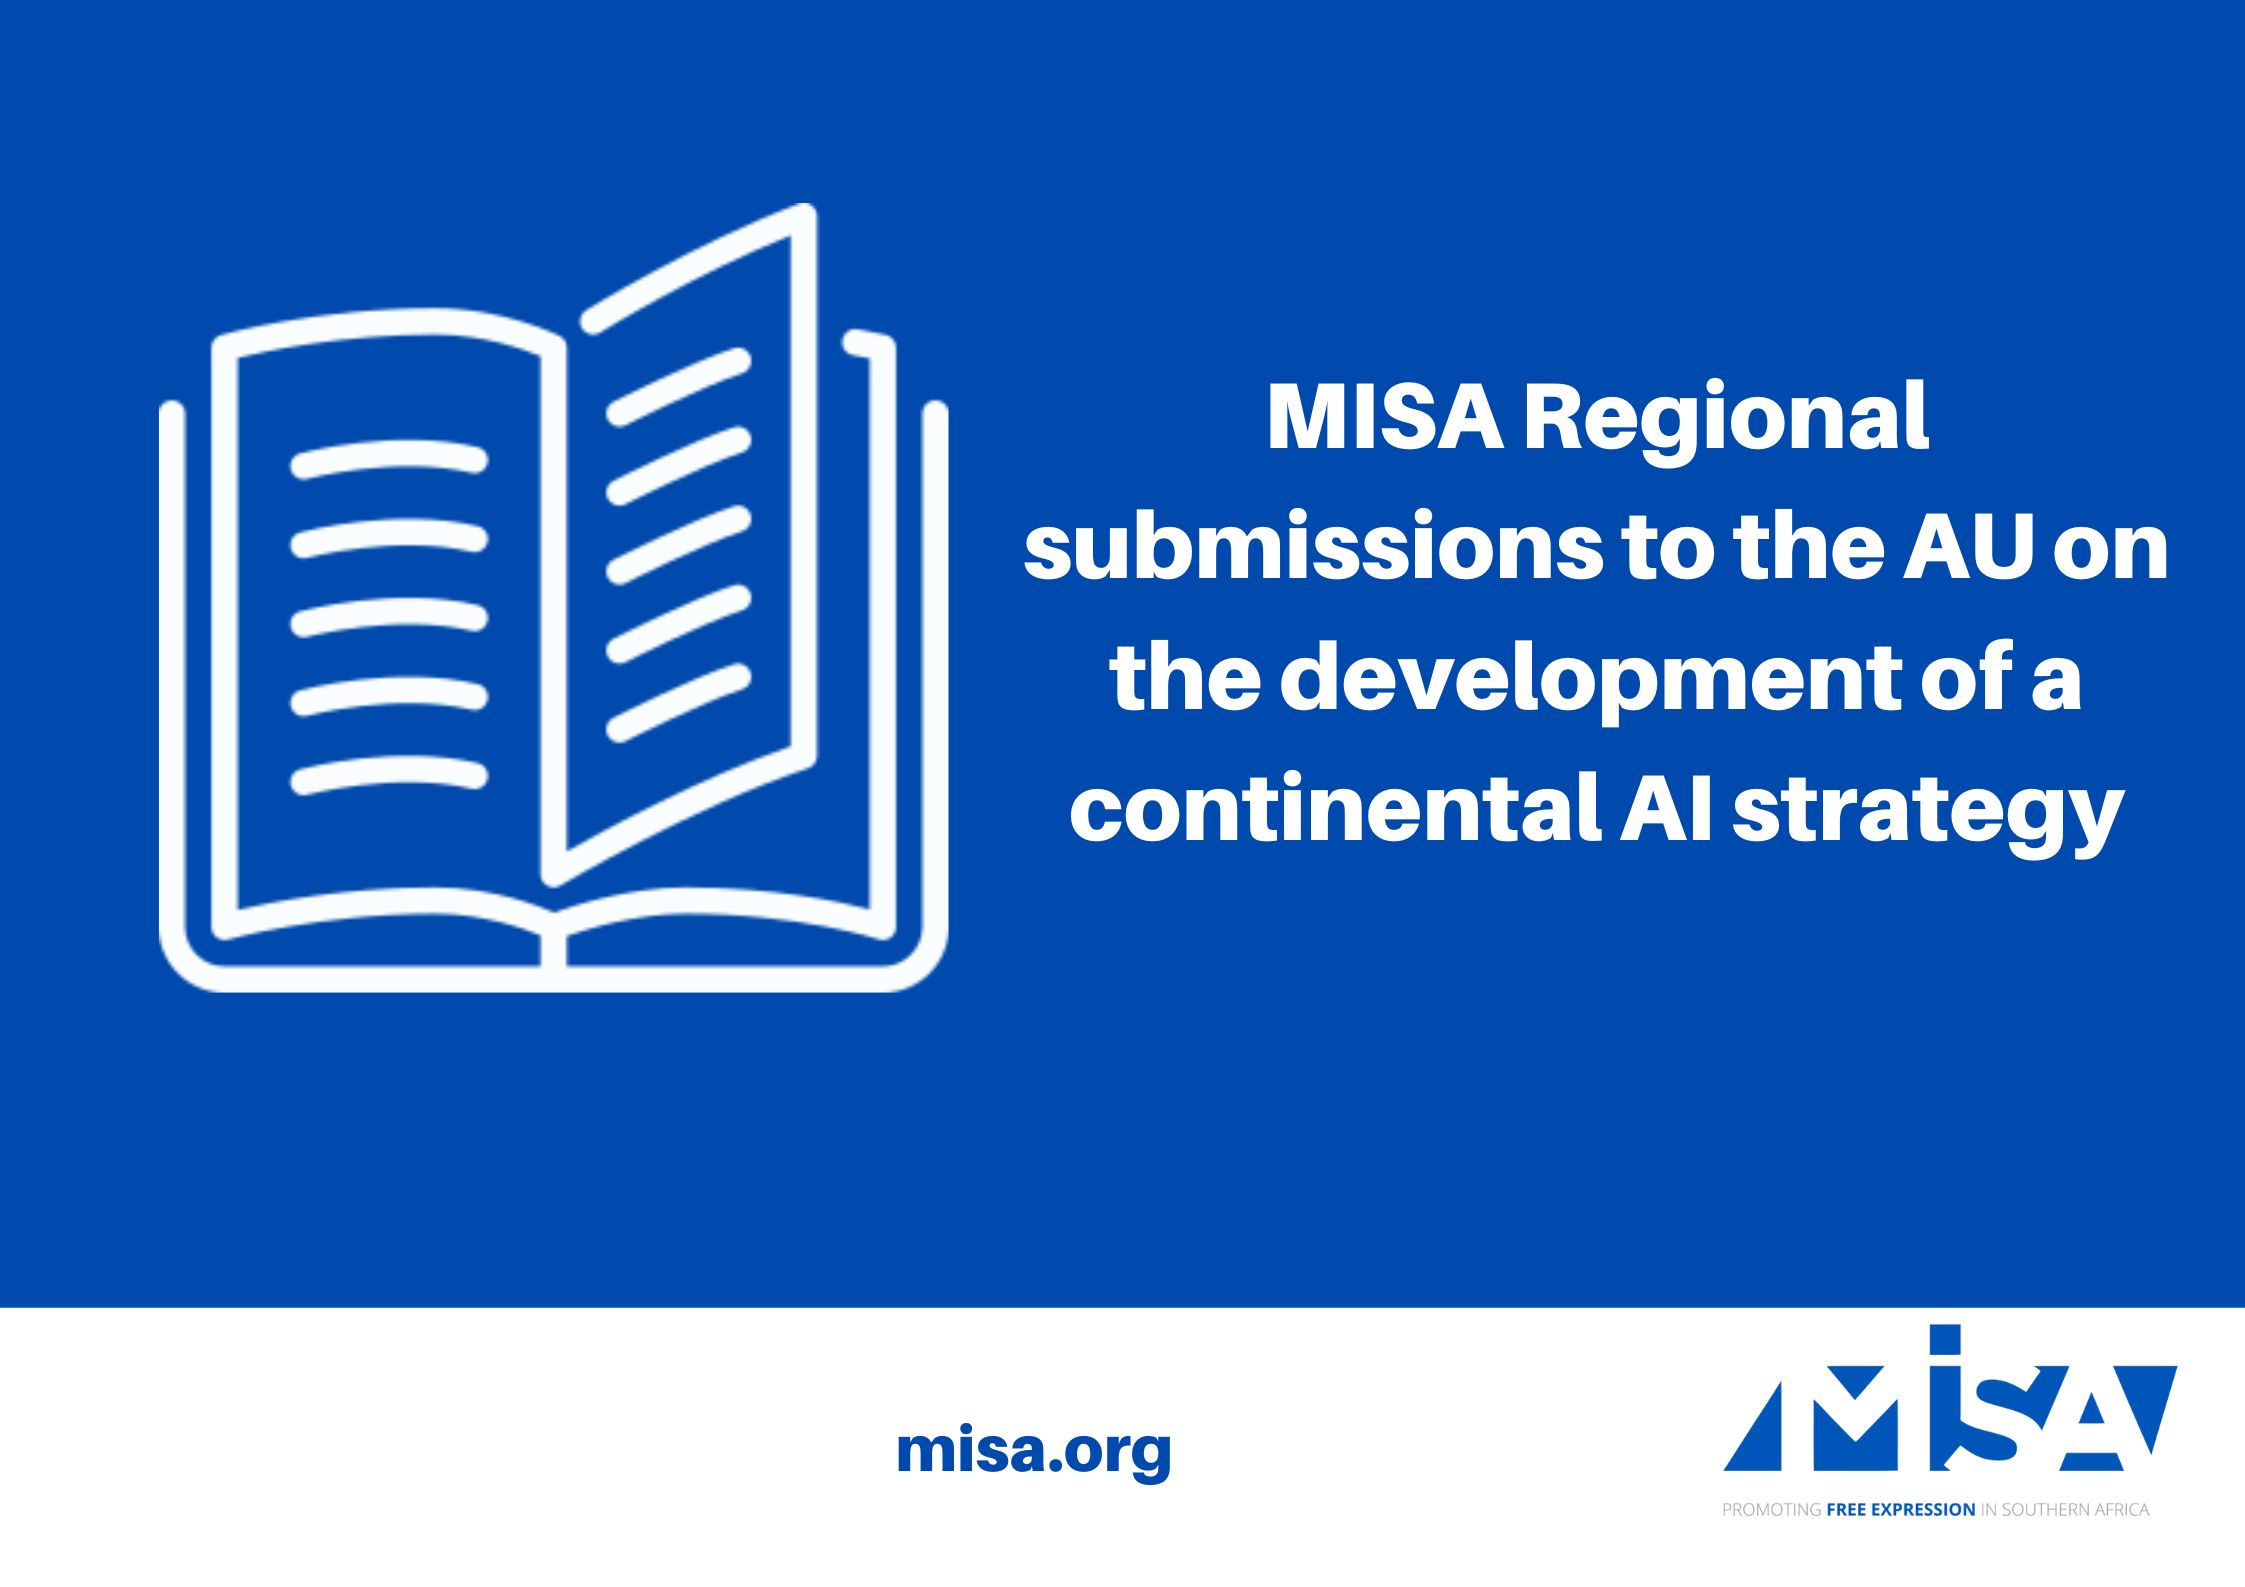 MISA Regional submissions to the AU on the development of a continental AI strategy